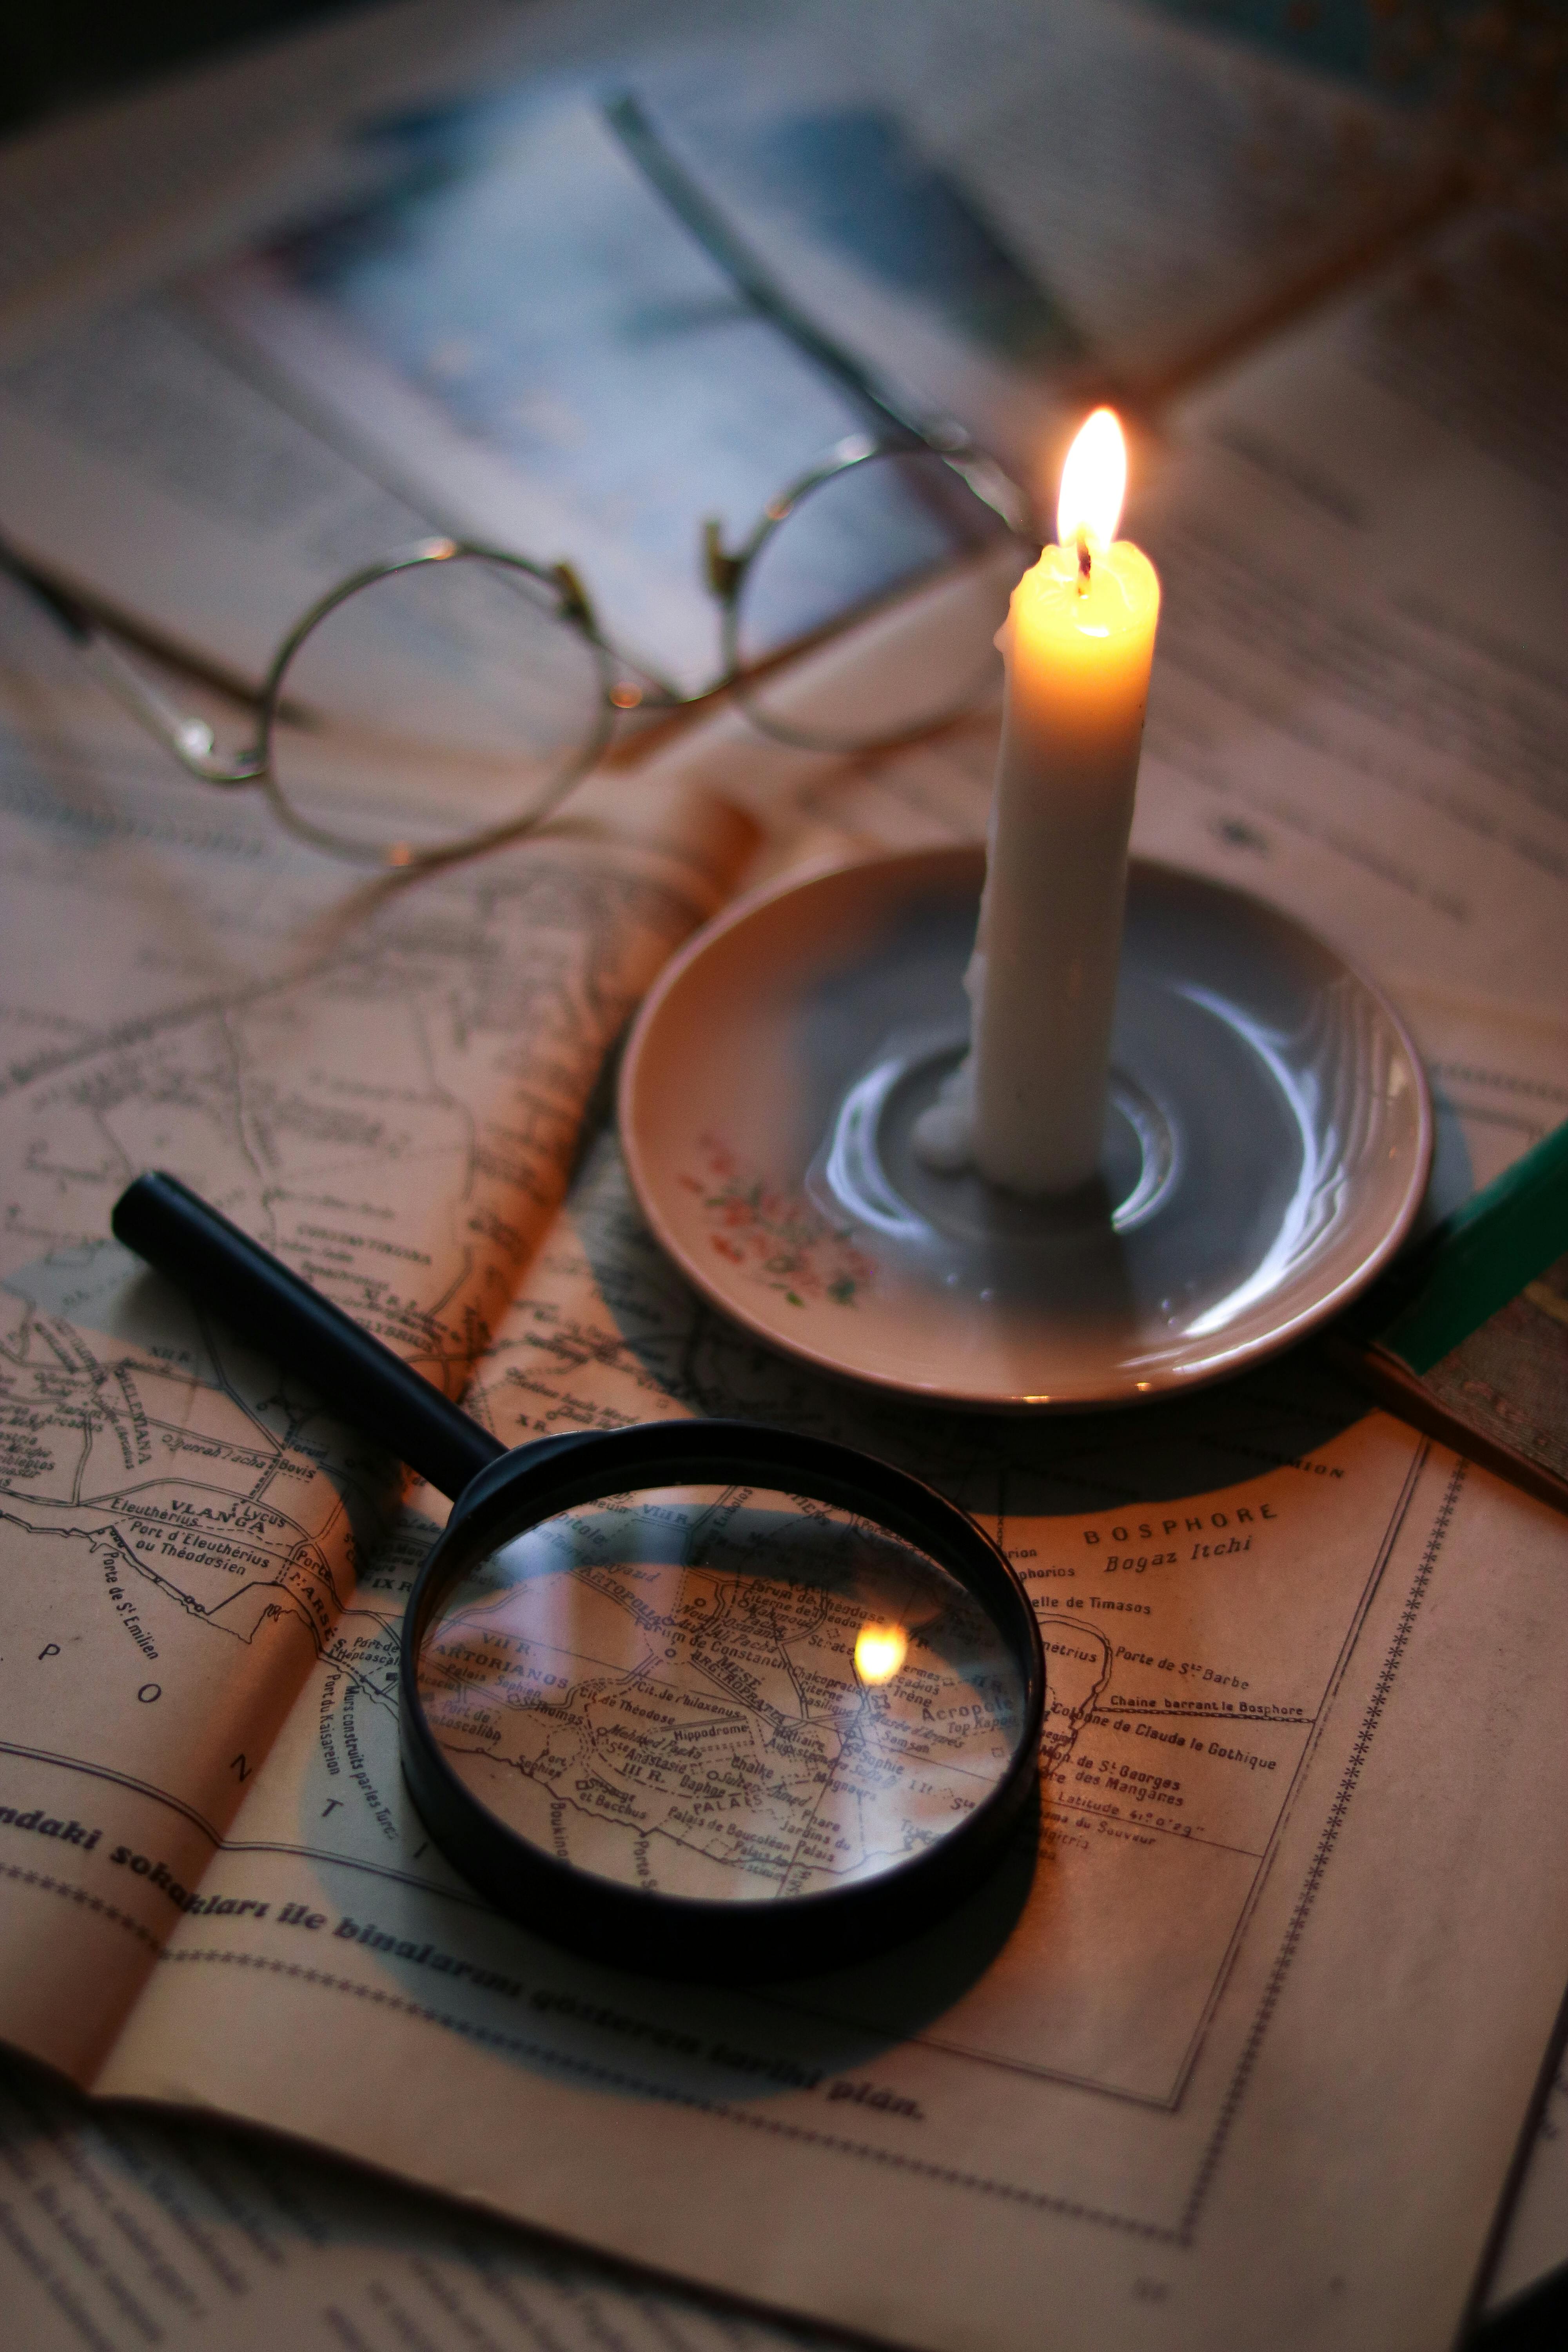 Reading, books in stacks and open. Bookmarks and glasses, candle